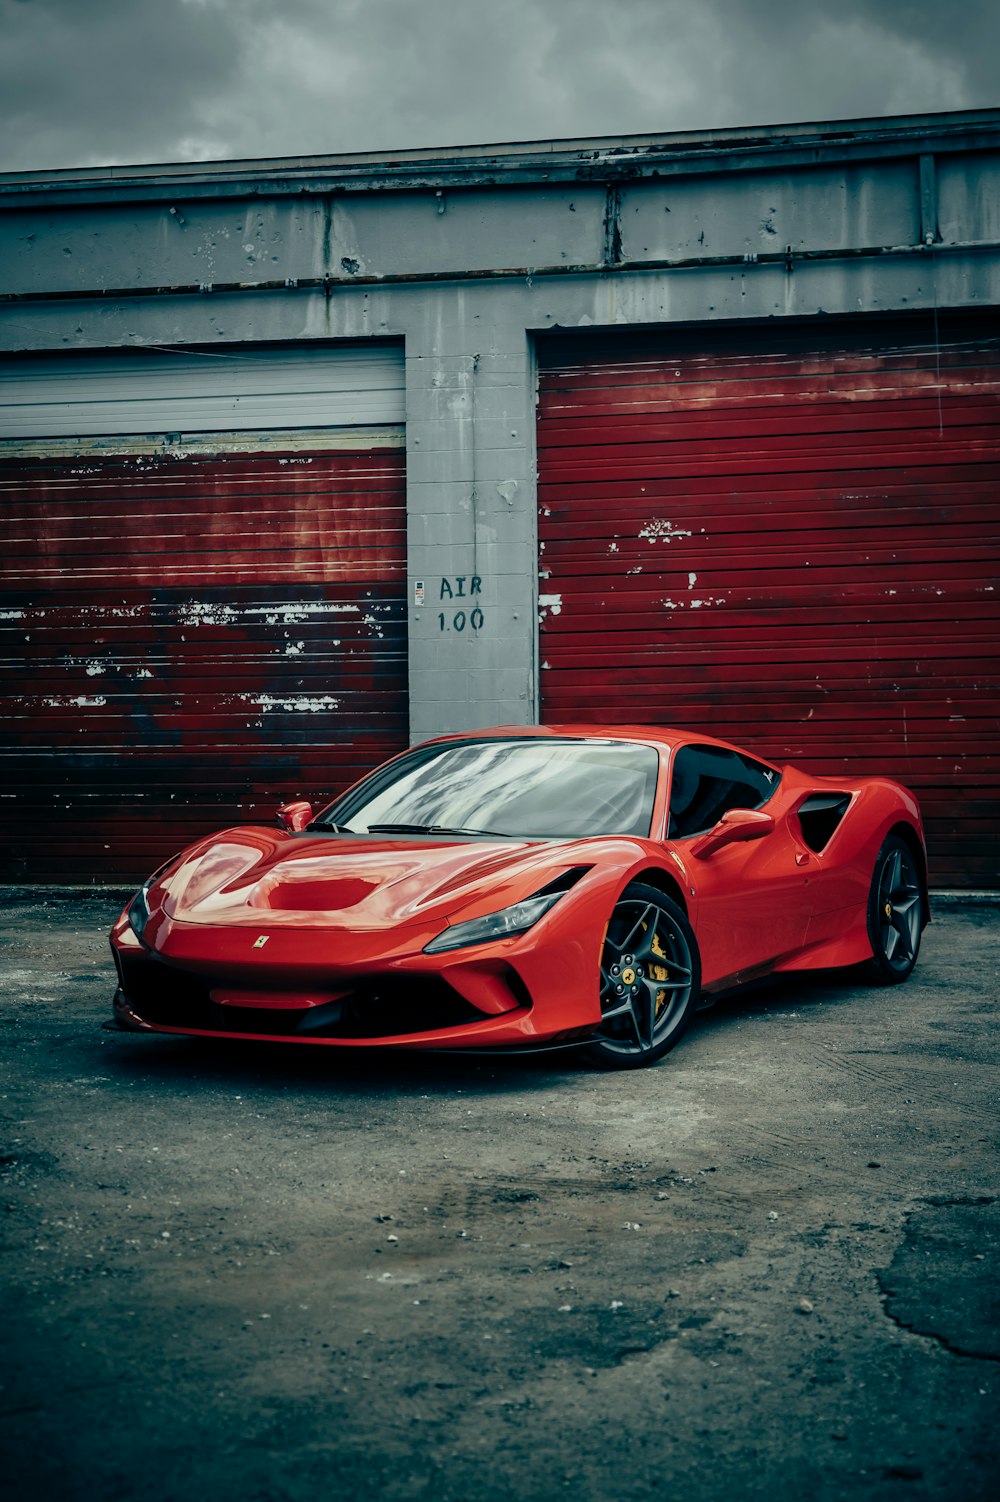 Rich Car Pictures | Download Free Images on Unsplash